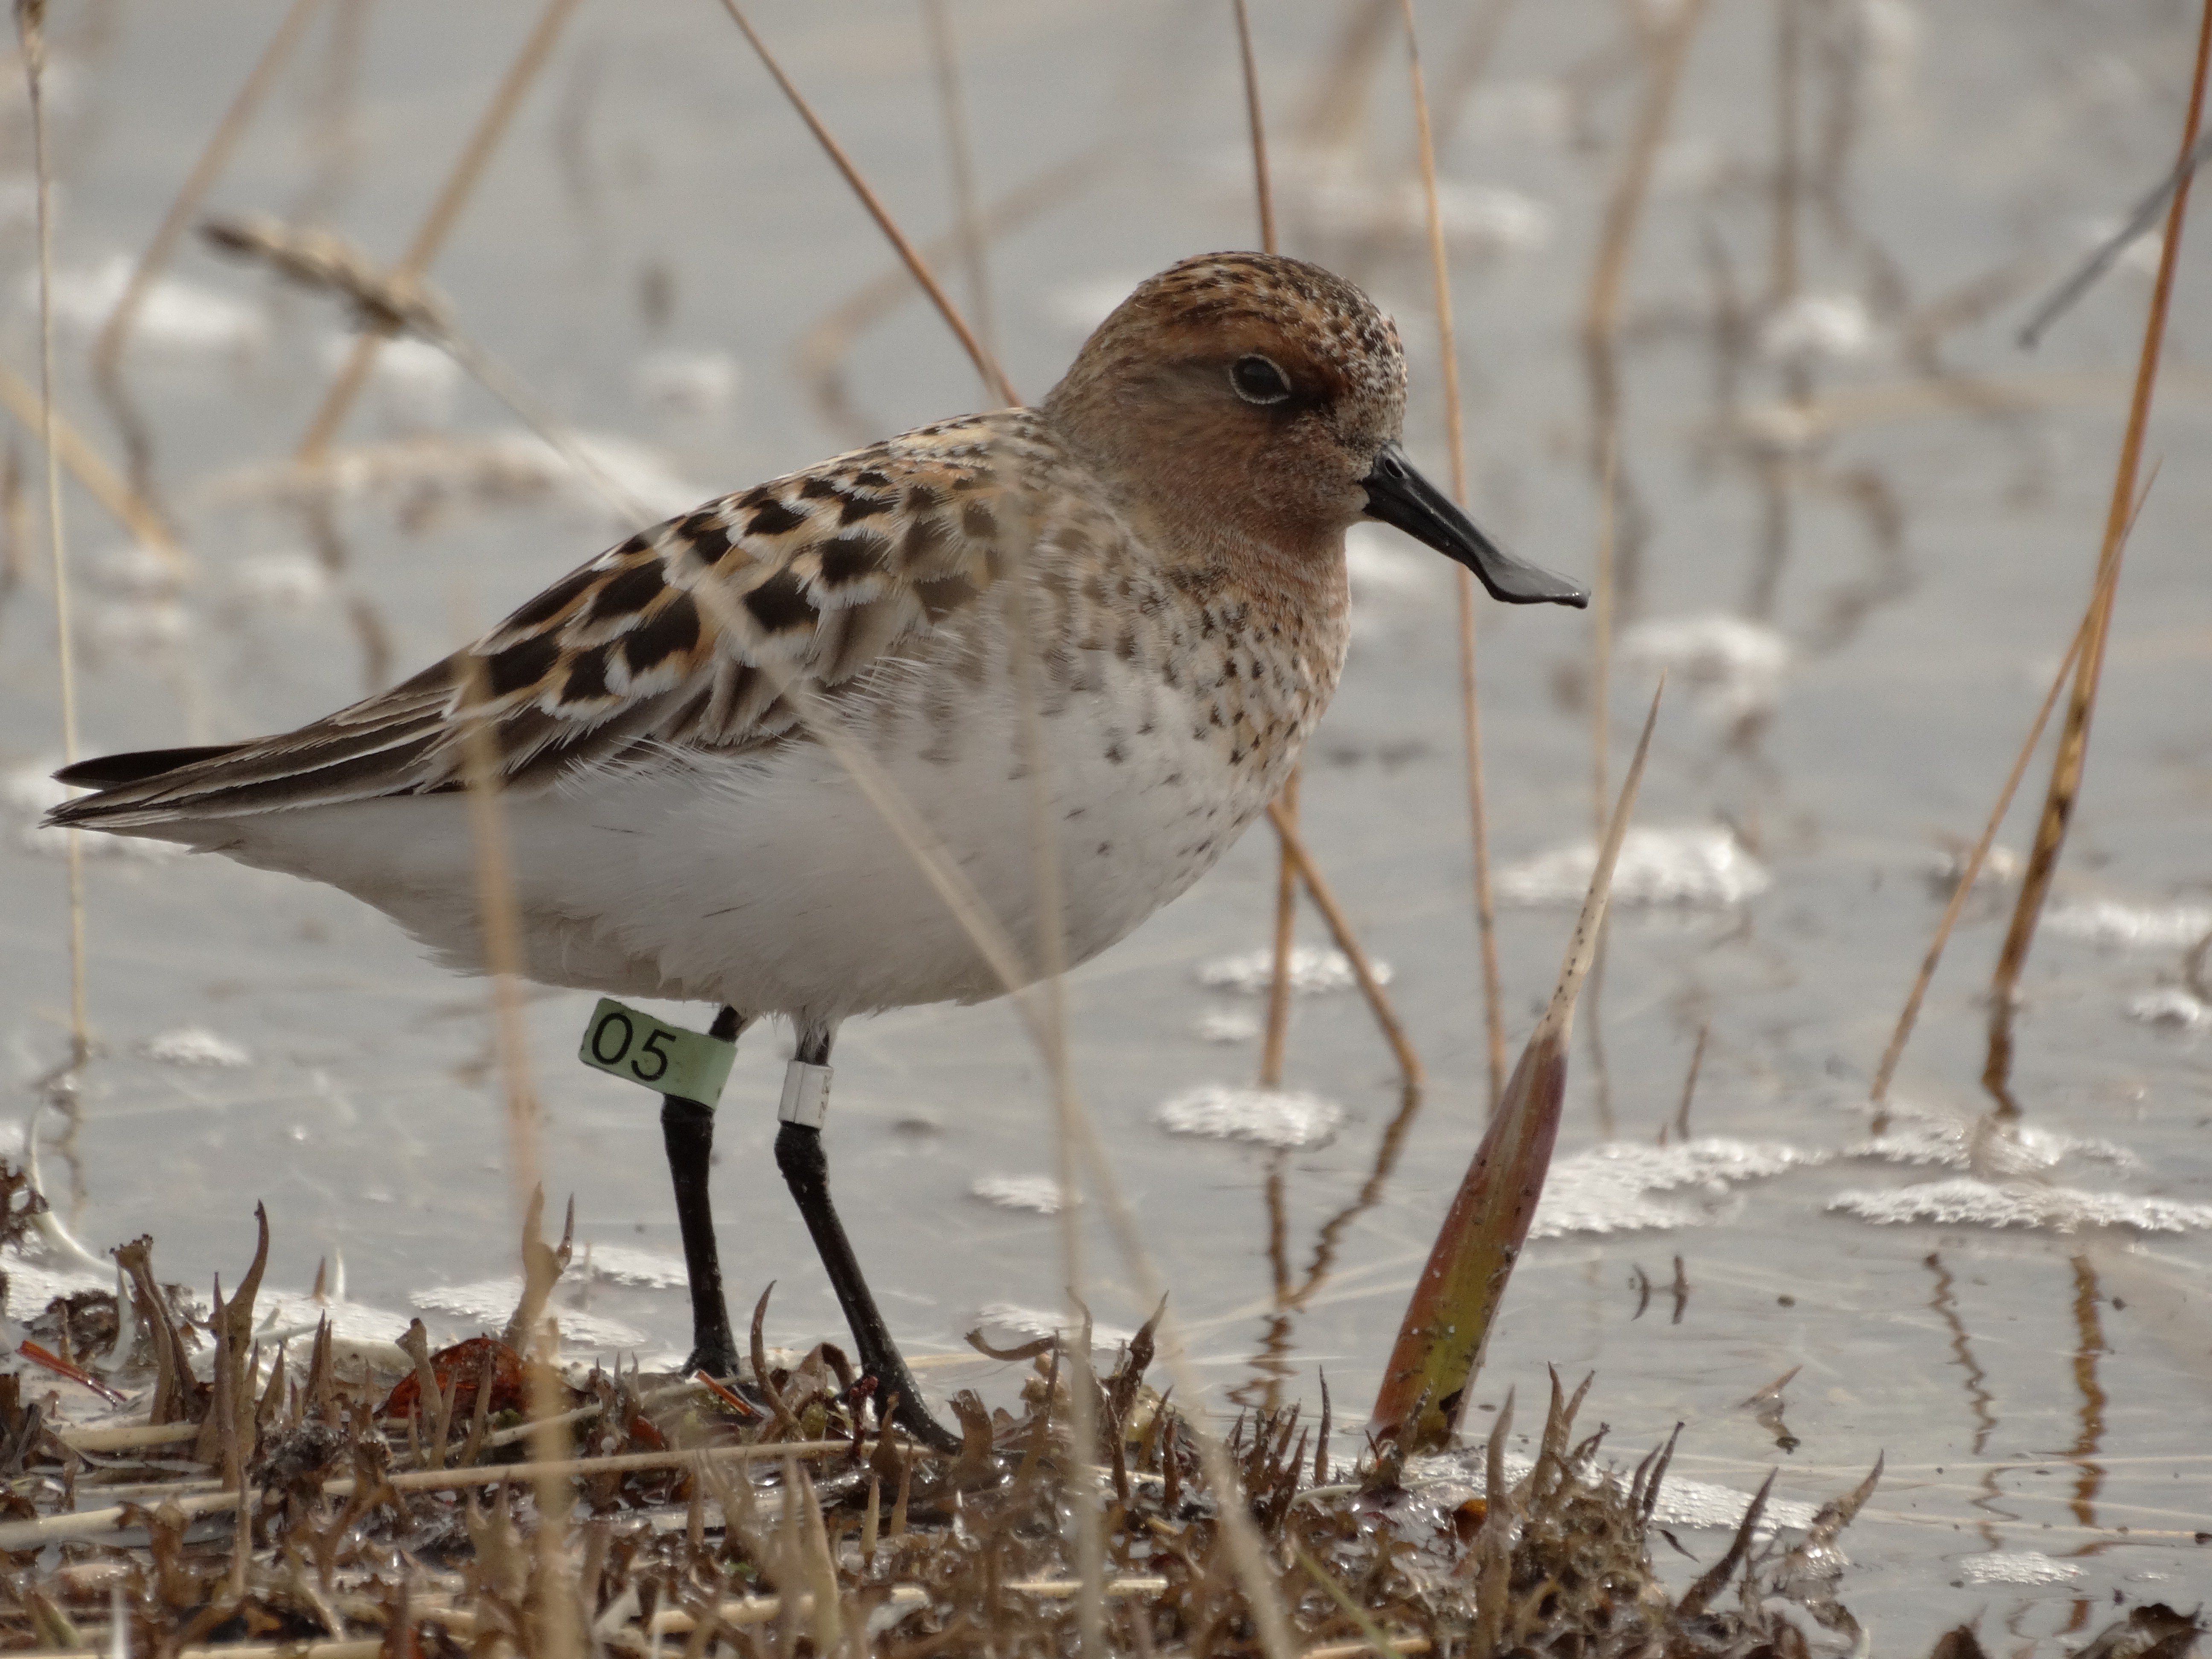 The spoon-billed sandpiper is a critically endangered bird that stops over in Chinese and Hong Kong wetlands on its migration to and from Siberia. Photo : Nickolay Yakushev